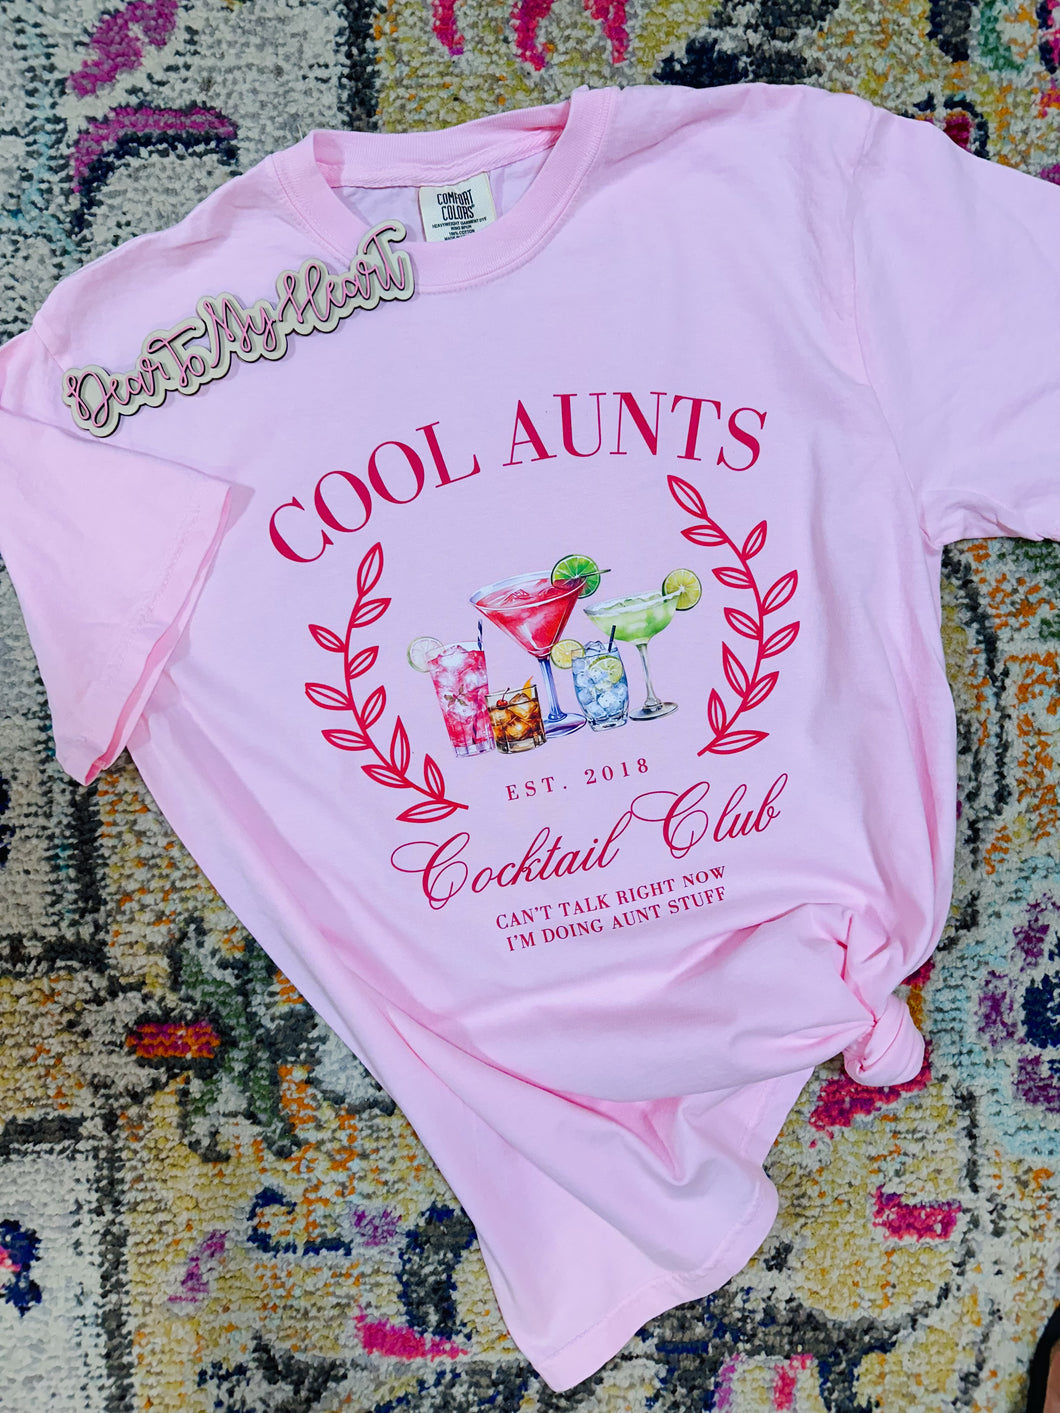 Cool Aunts - Personalized Cocktail Club